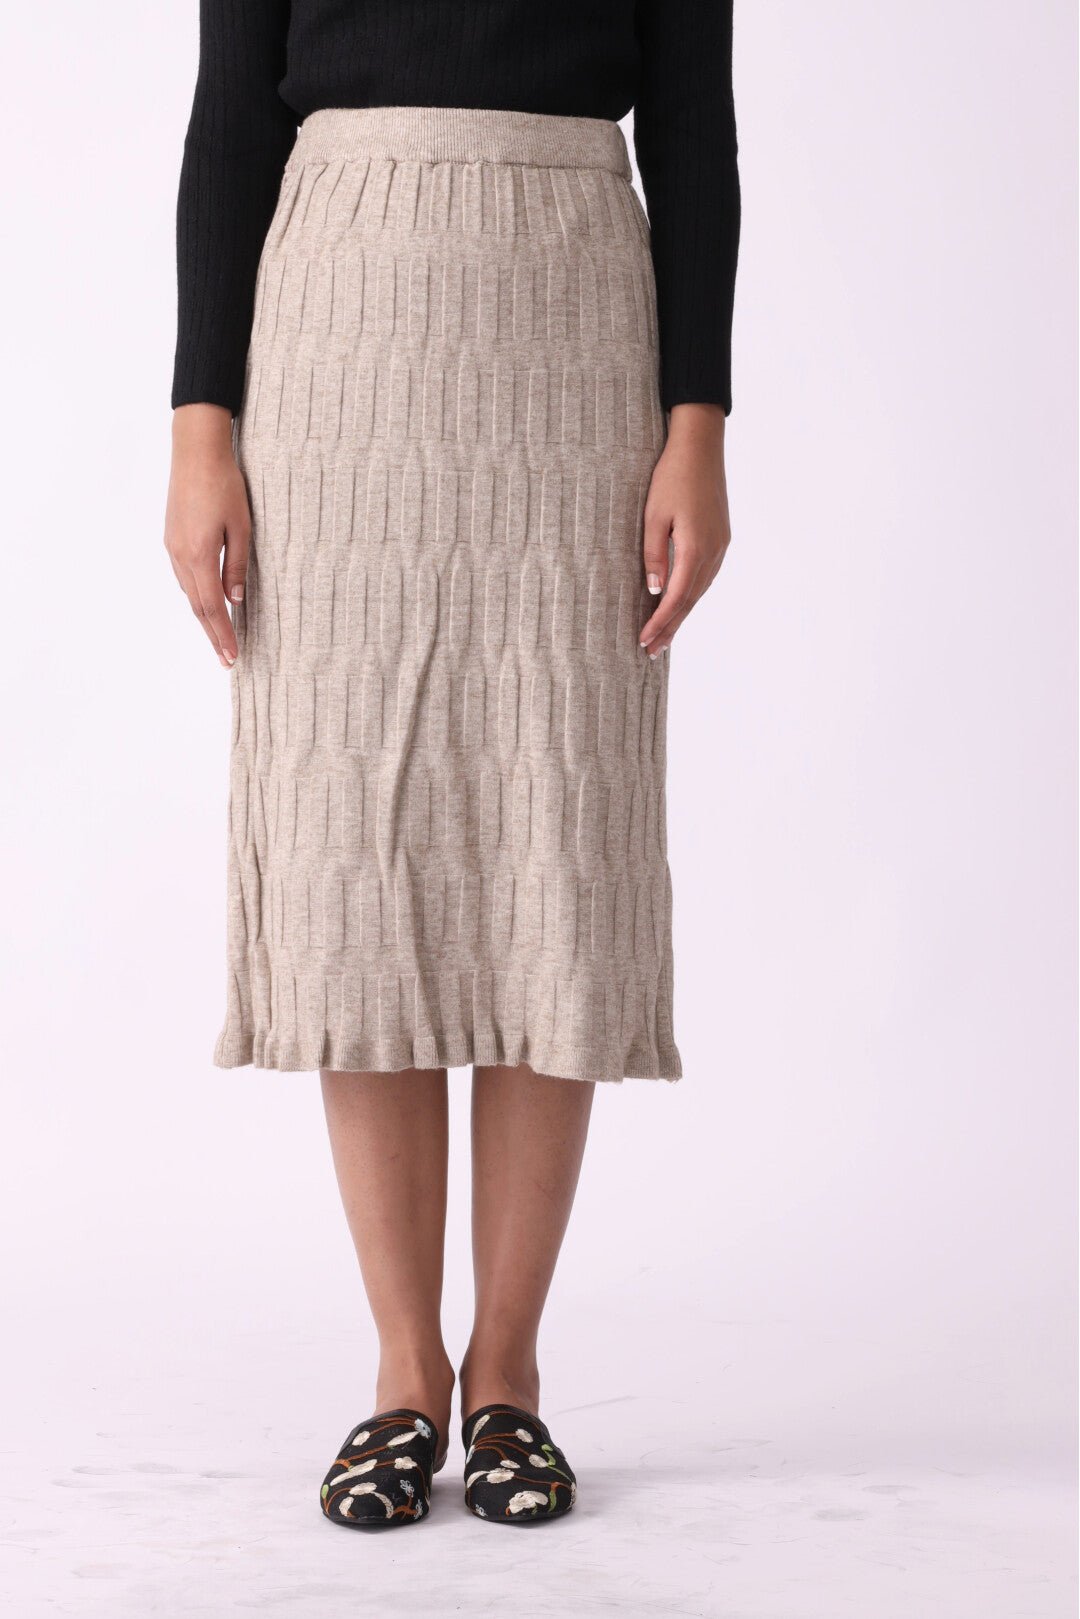 Embossed Texture Knit Pencil Skirt - Negative Apparel